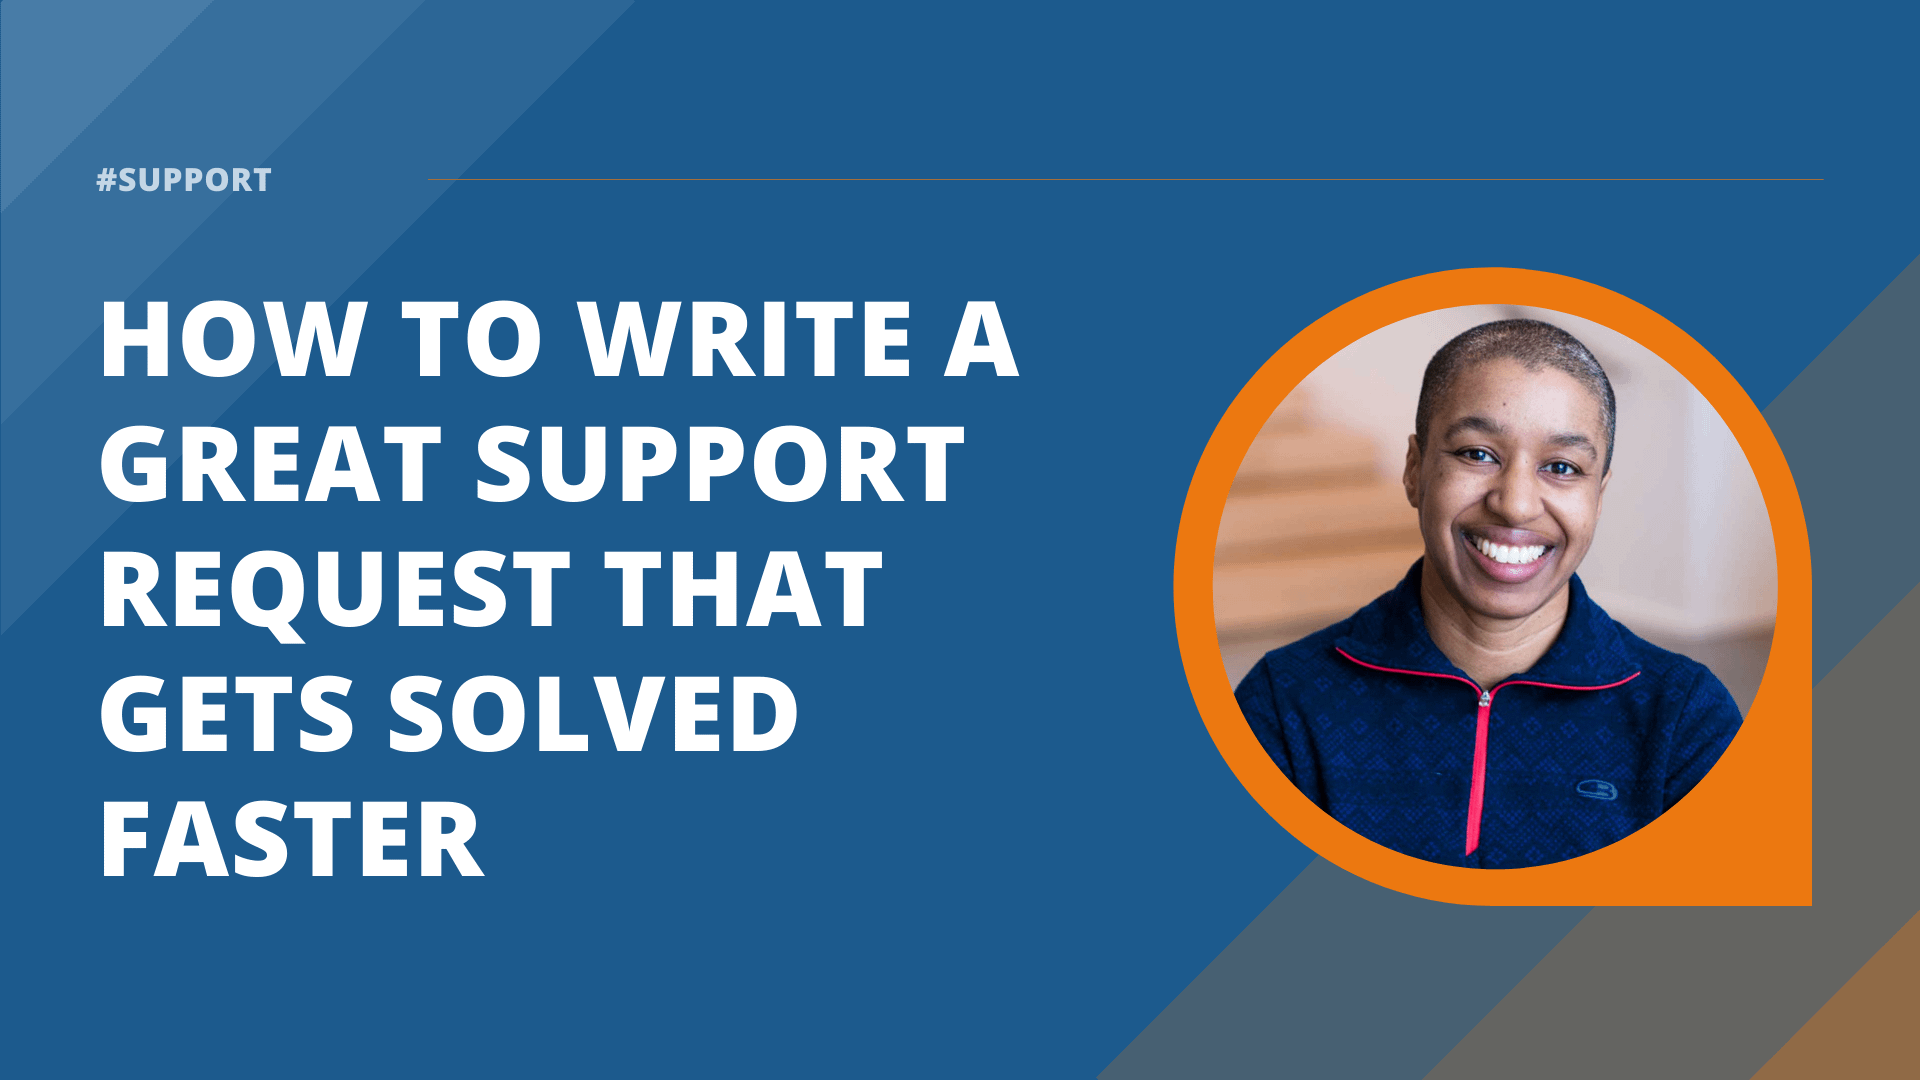 How to write a great support request that gets solved faster